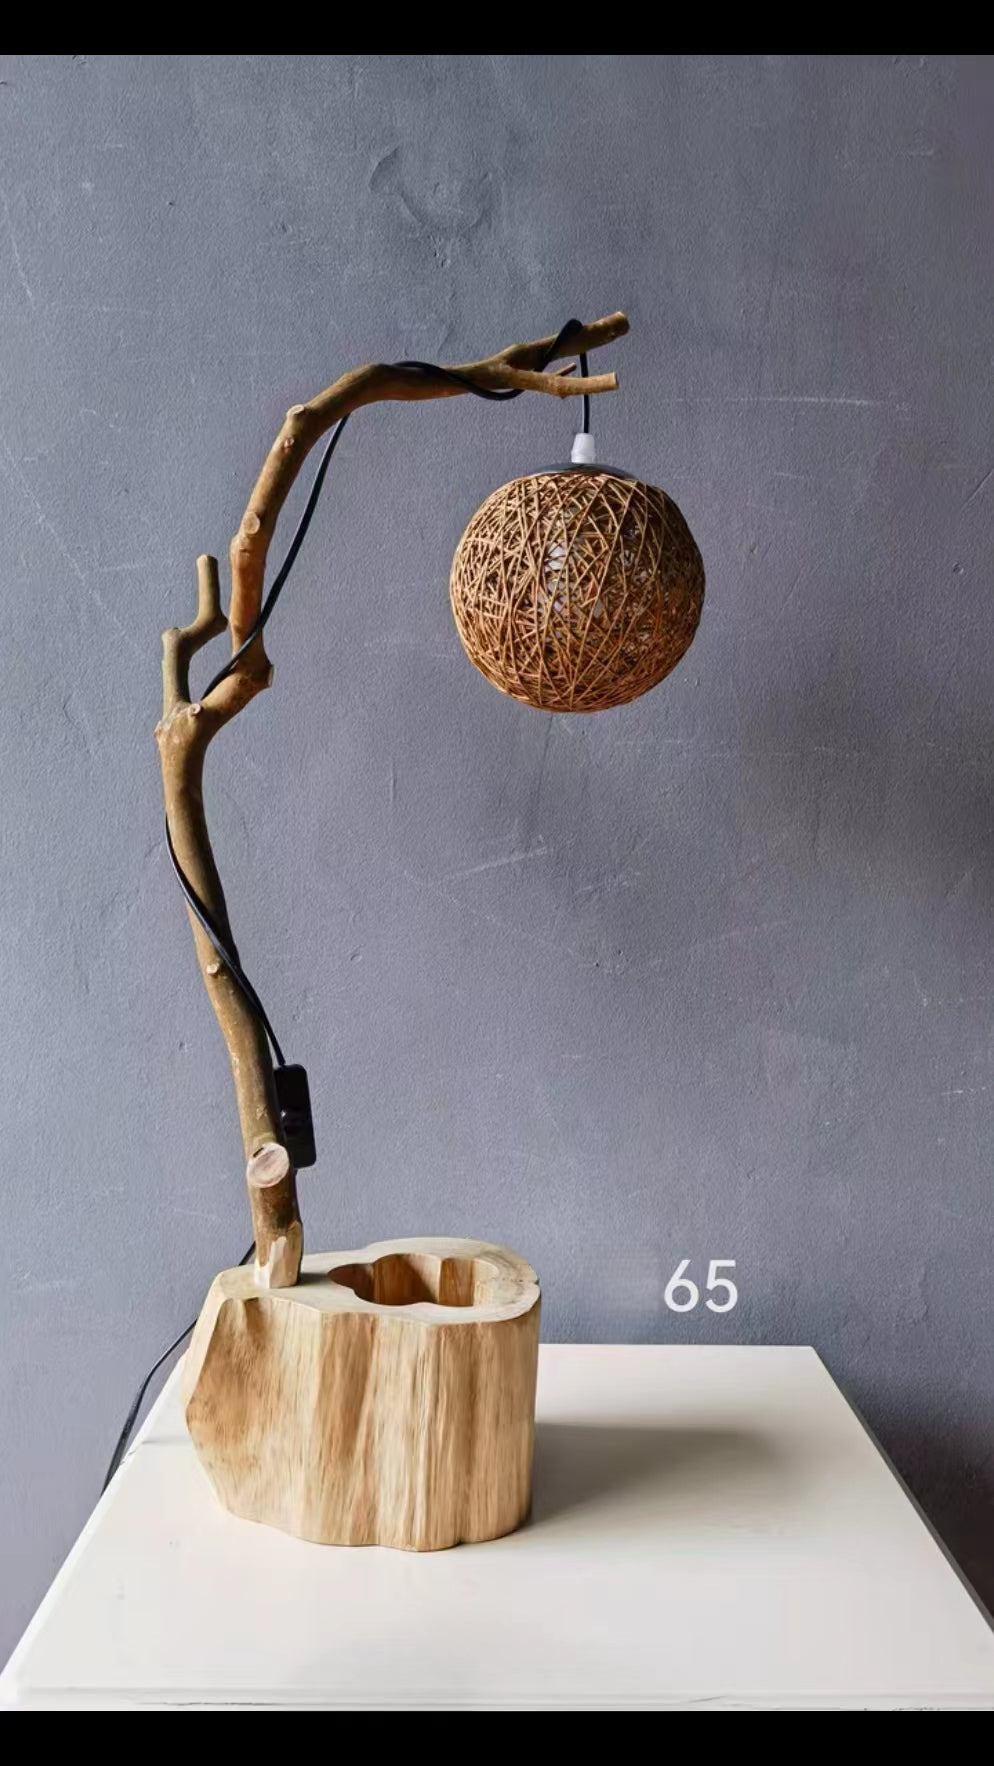 Solid Wood Arched Lamp - 4 Seasons Home Gadgets